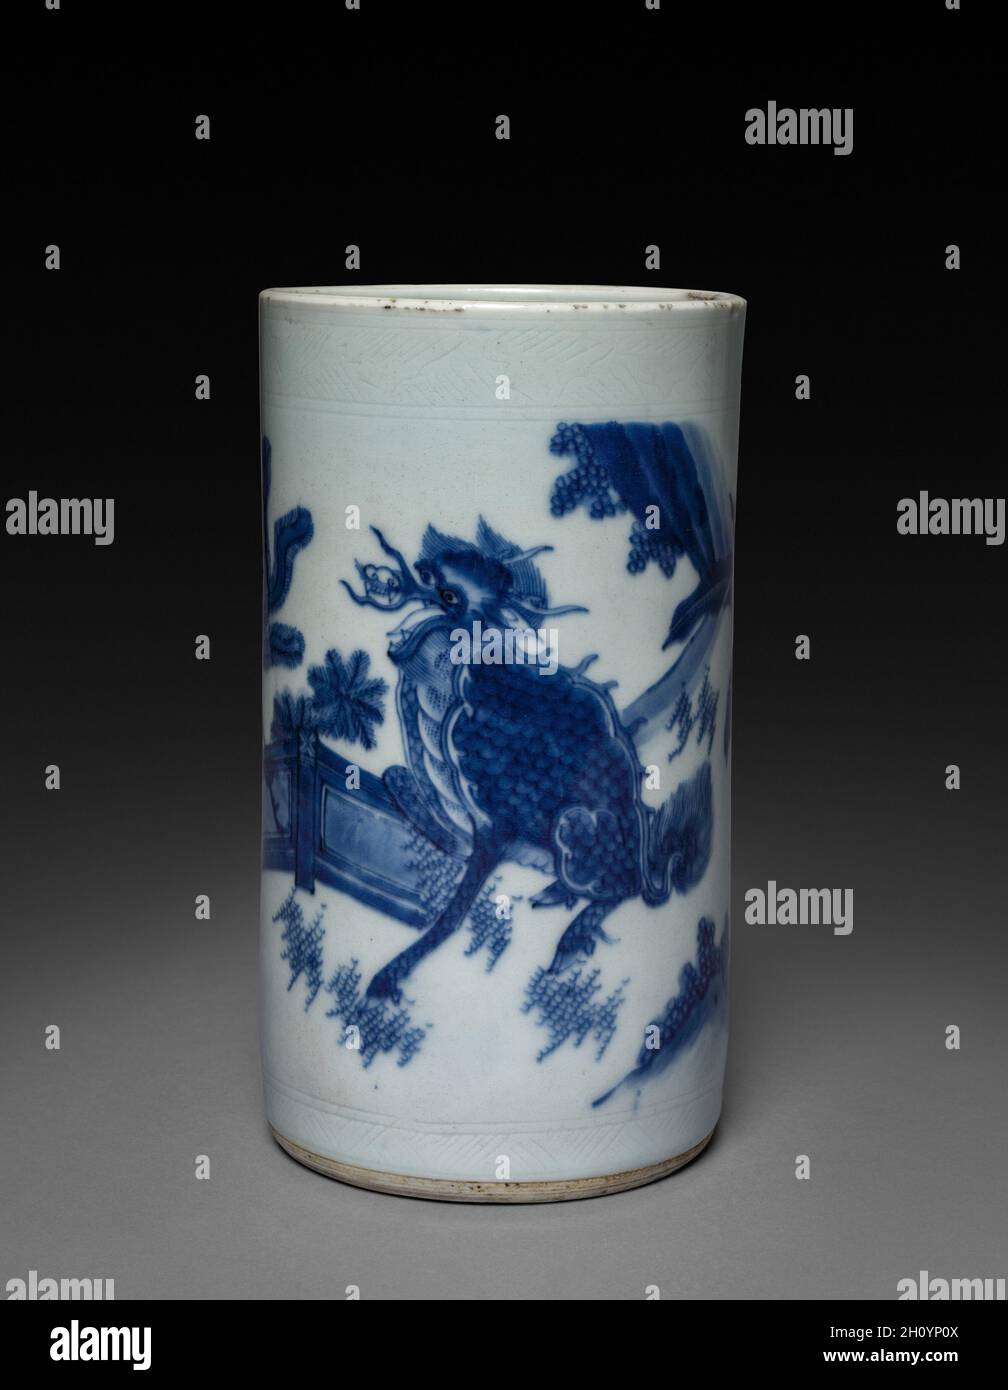 Brush Holder, 1628-44. China, Jiangxi province, Jingdezhen kilns,  "Transitional period", Ming dynasty (1368-1644), Chongzhen reign  (1628-1644). Porcelain; overall: 19.1 cm (7 1/2 in.). This porcelain brush  holder is considered to have been